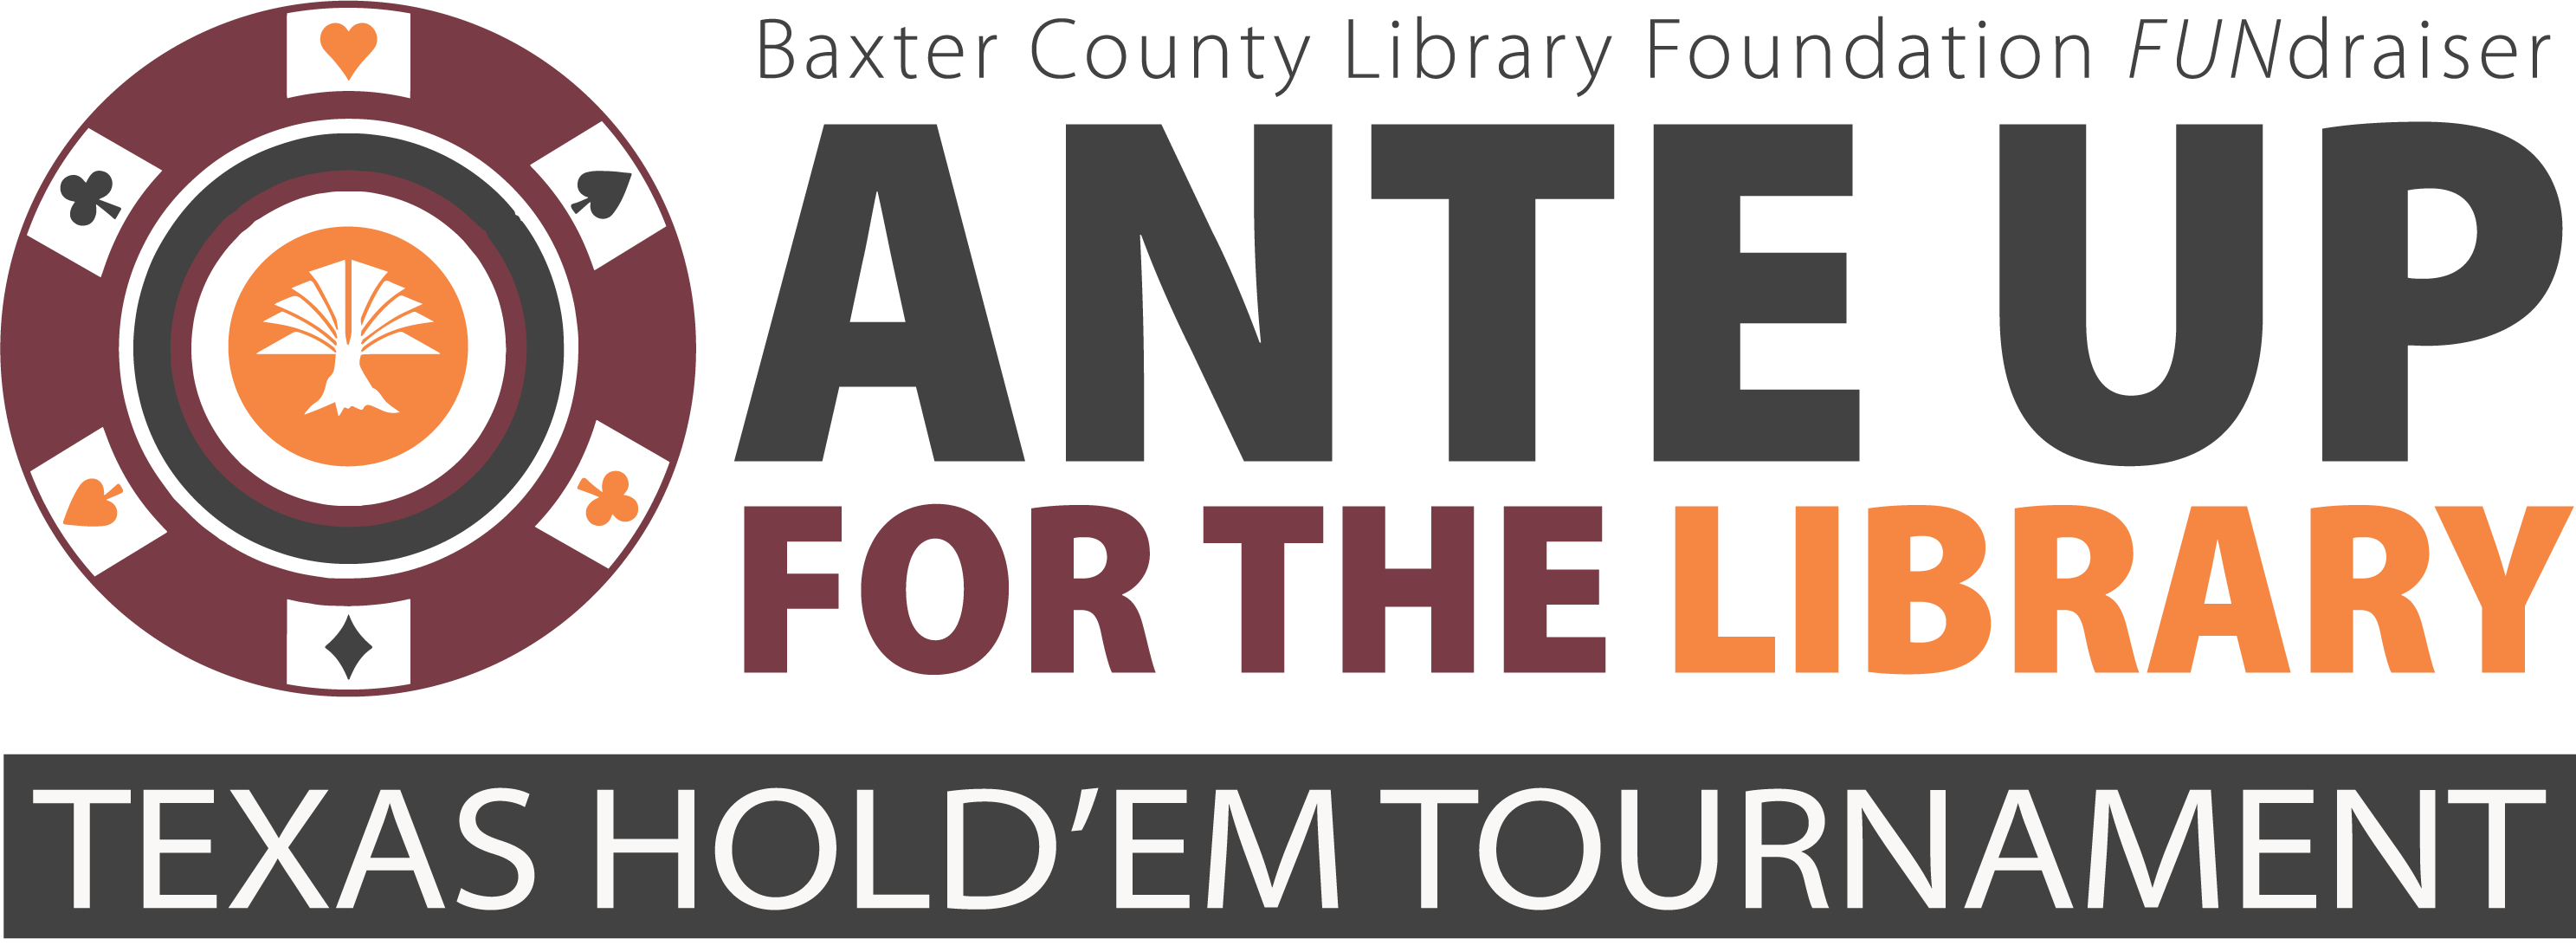 Ante Up for the Library: Baxter County Library Foundation FUNdraiser Texas Hold Em Tournament banner